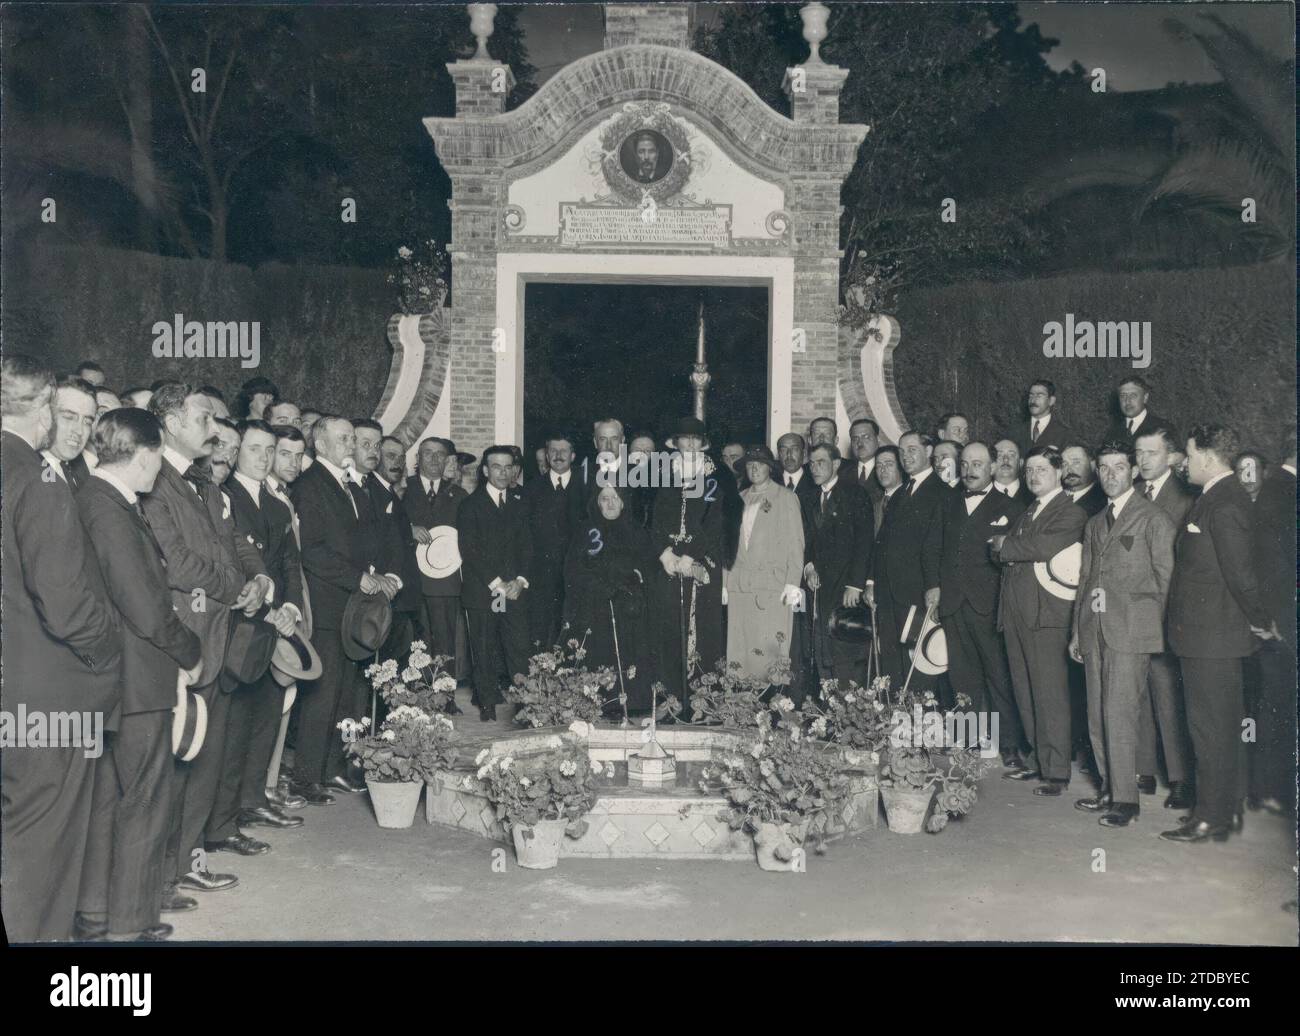 04/30/1923. Seville. In the Murillo Gardens. Ss.Aa. the Infantes D. Carlos (1) and Doña Luisa (2), with the widow of the famous painter José García y Ramos (3), at the inauguration of the gazebo to which the name of this artist has been given. Credit: Album / Archivo ABC / Juan Barrera Stock Photo